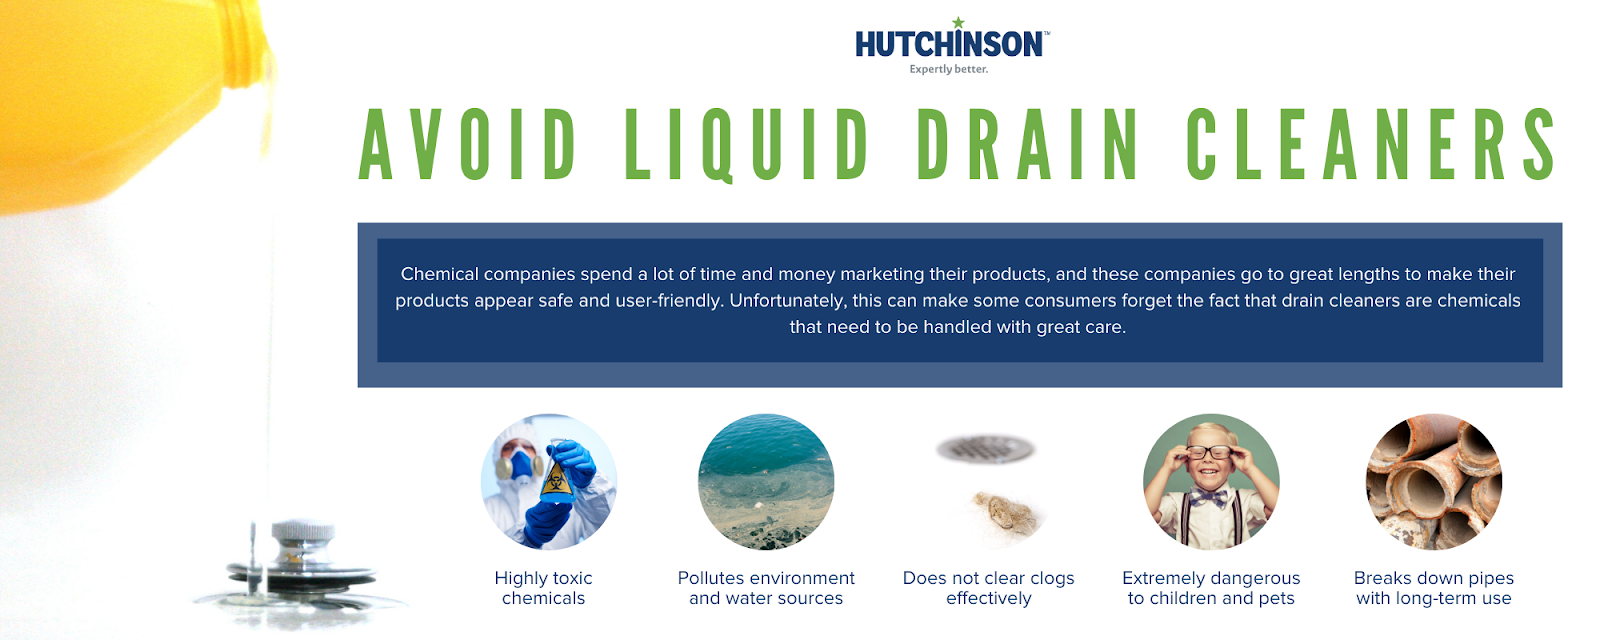 Can Chemical Drain Cleaners Damage Your Plumbing?